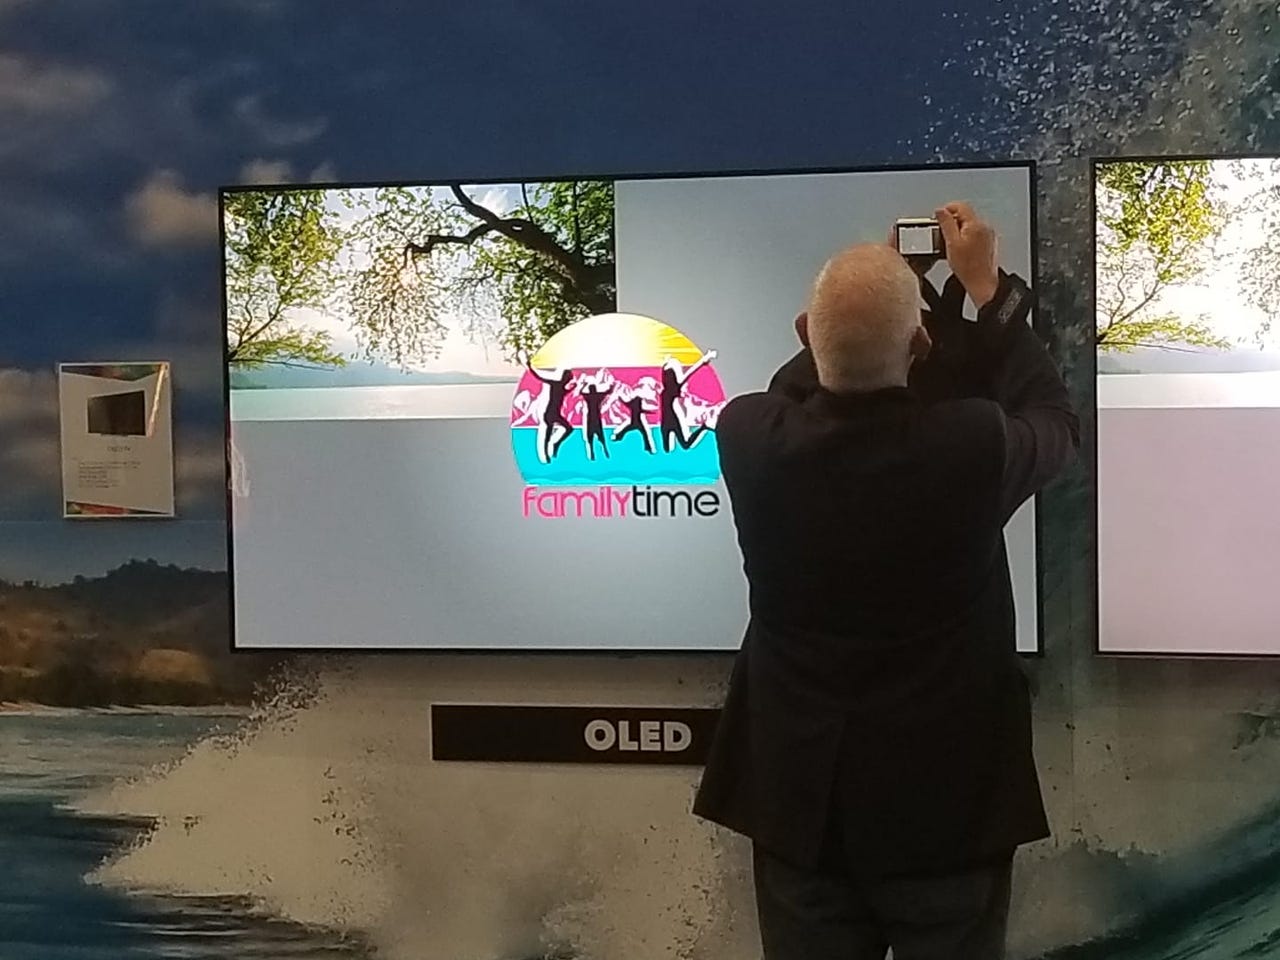 LG embarrasses with OLED burn-in at SID tradeshow | ZDNET